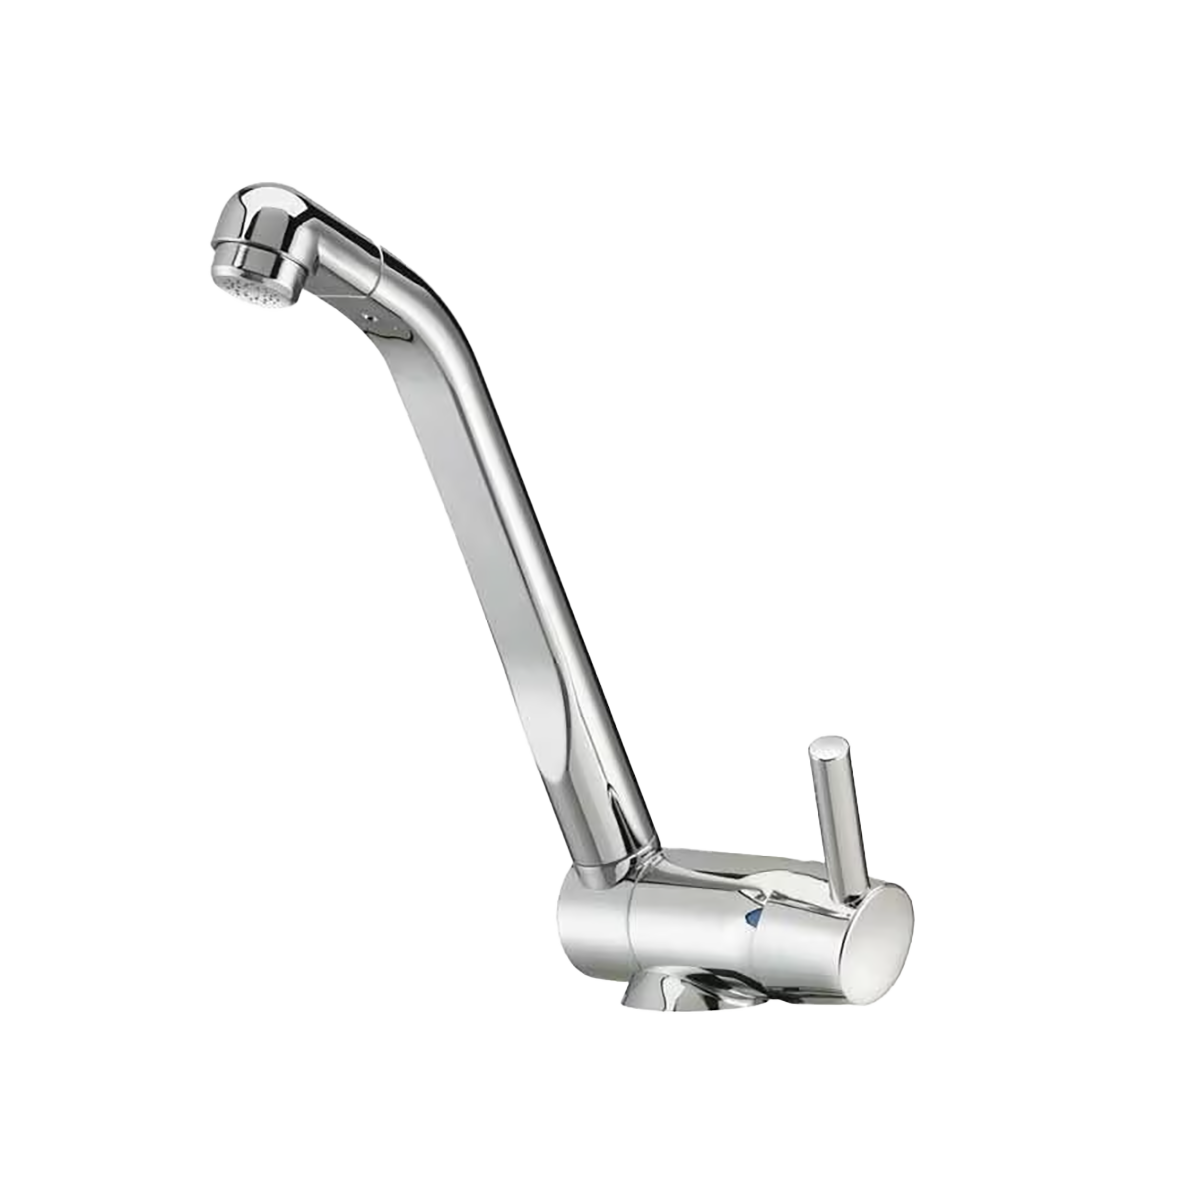 TREND C curved spout